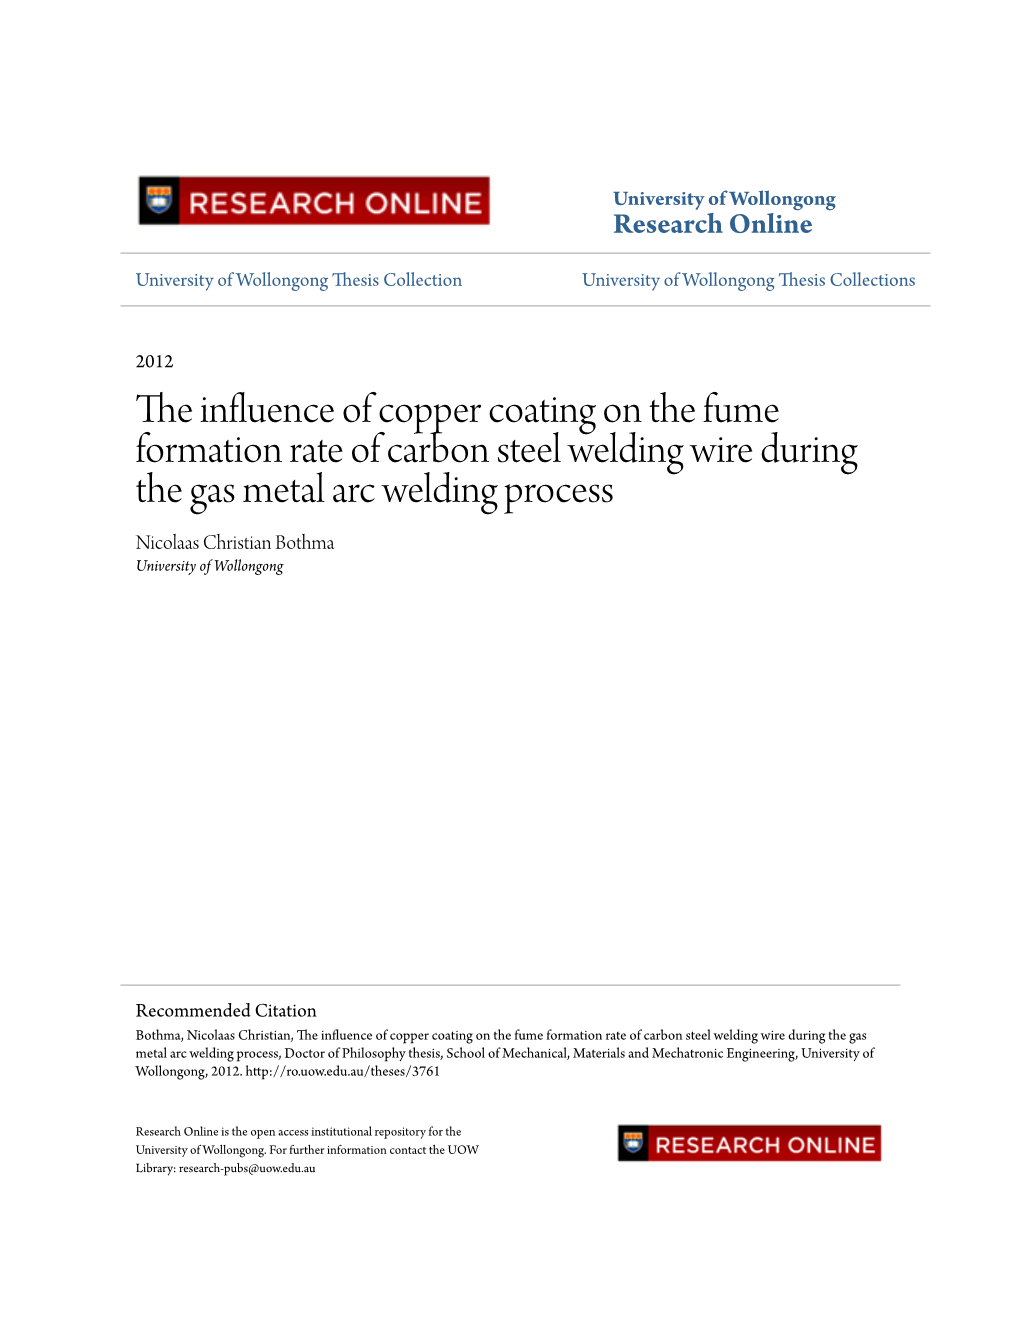 The Influence of Copper Coating on the Fume Formation Rate of Carbon Steel